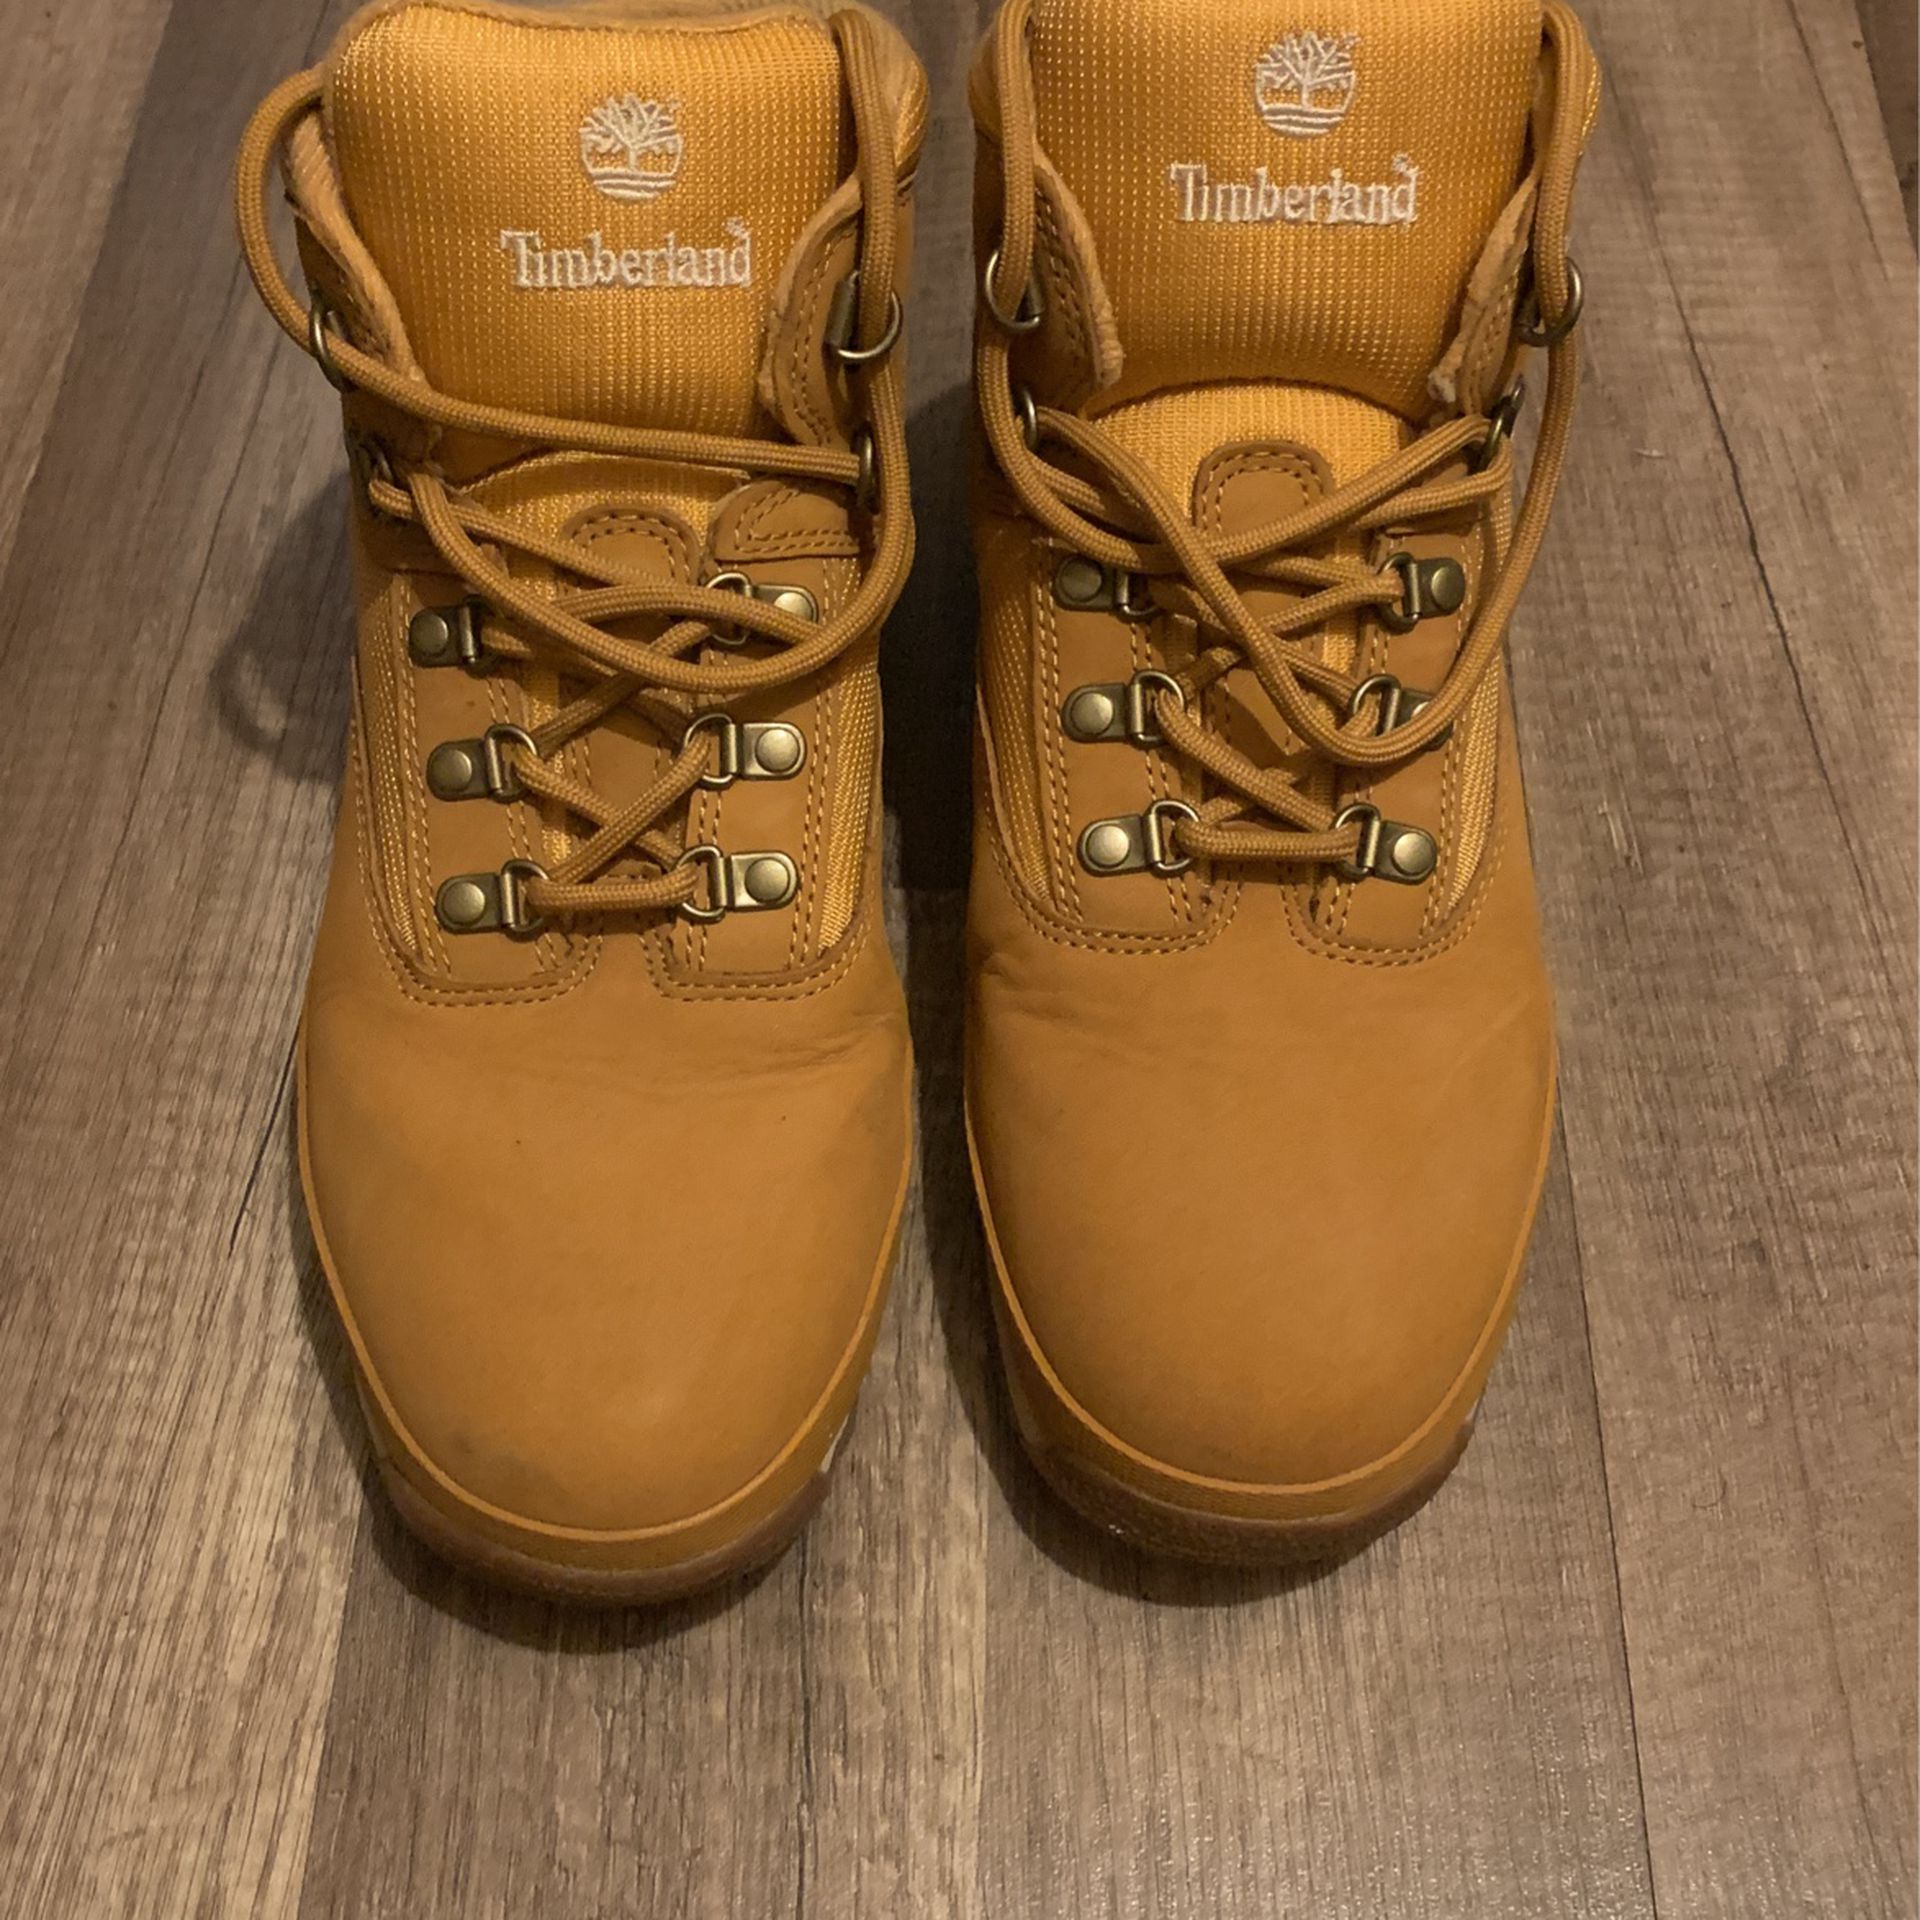 Woman’s Timberland Boots Size 7